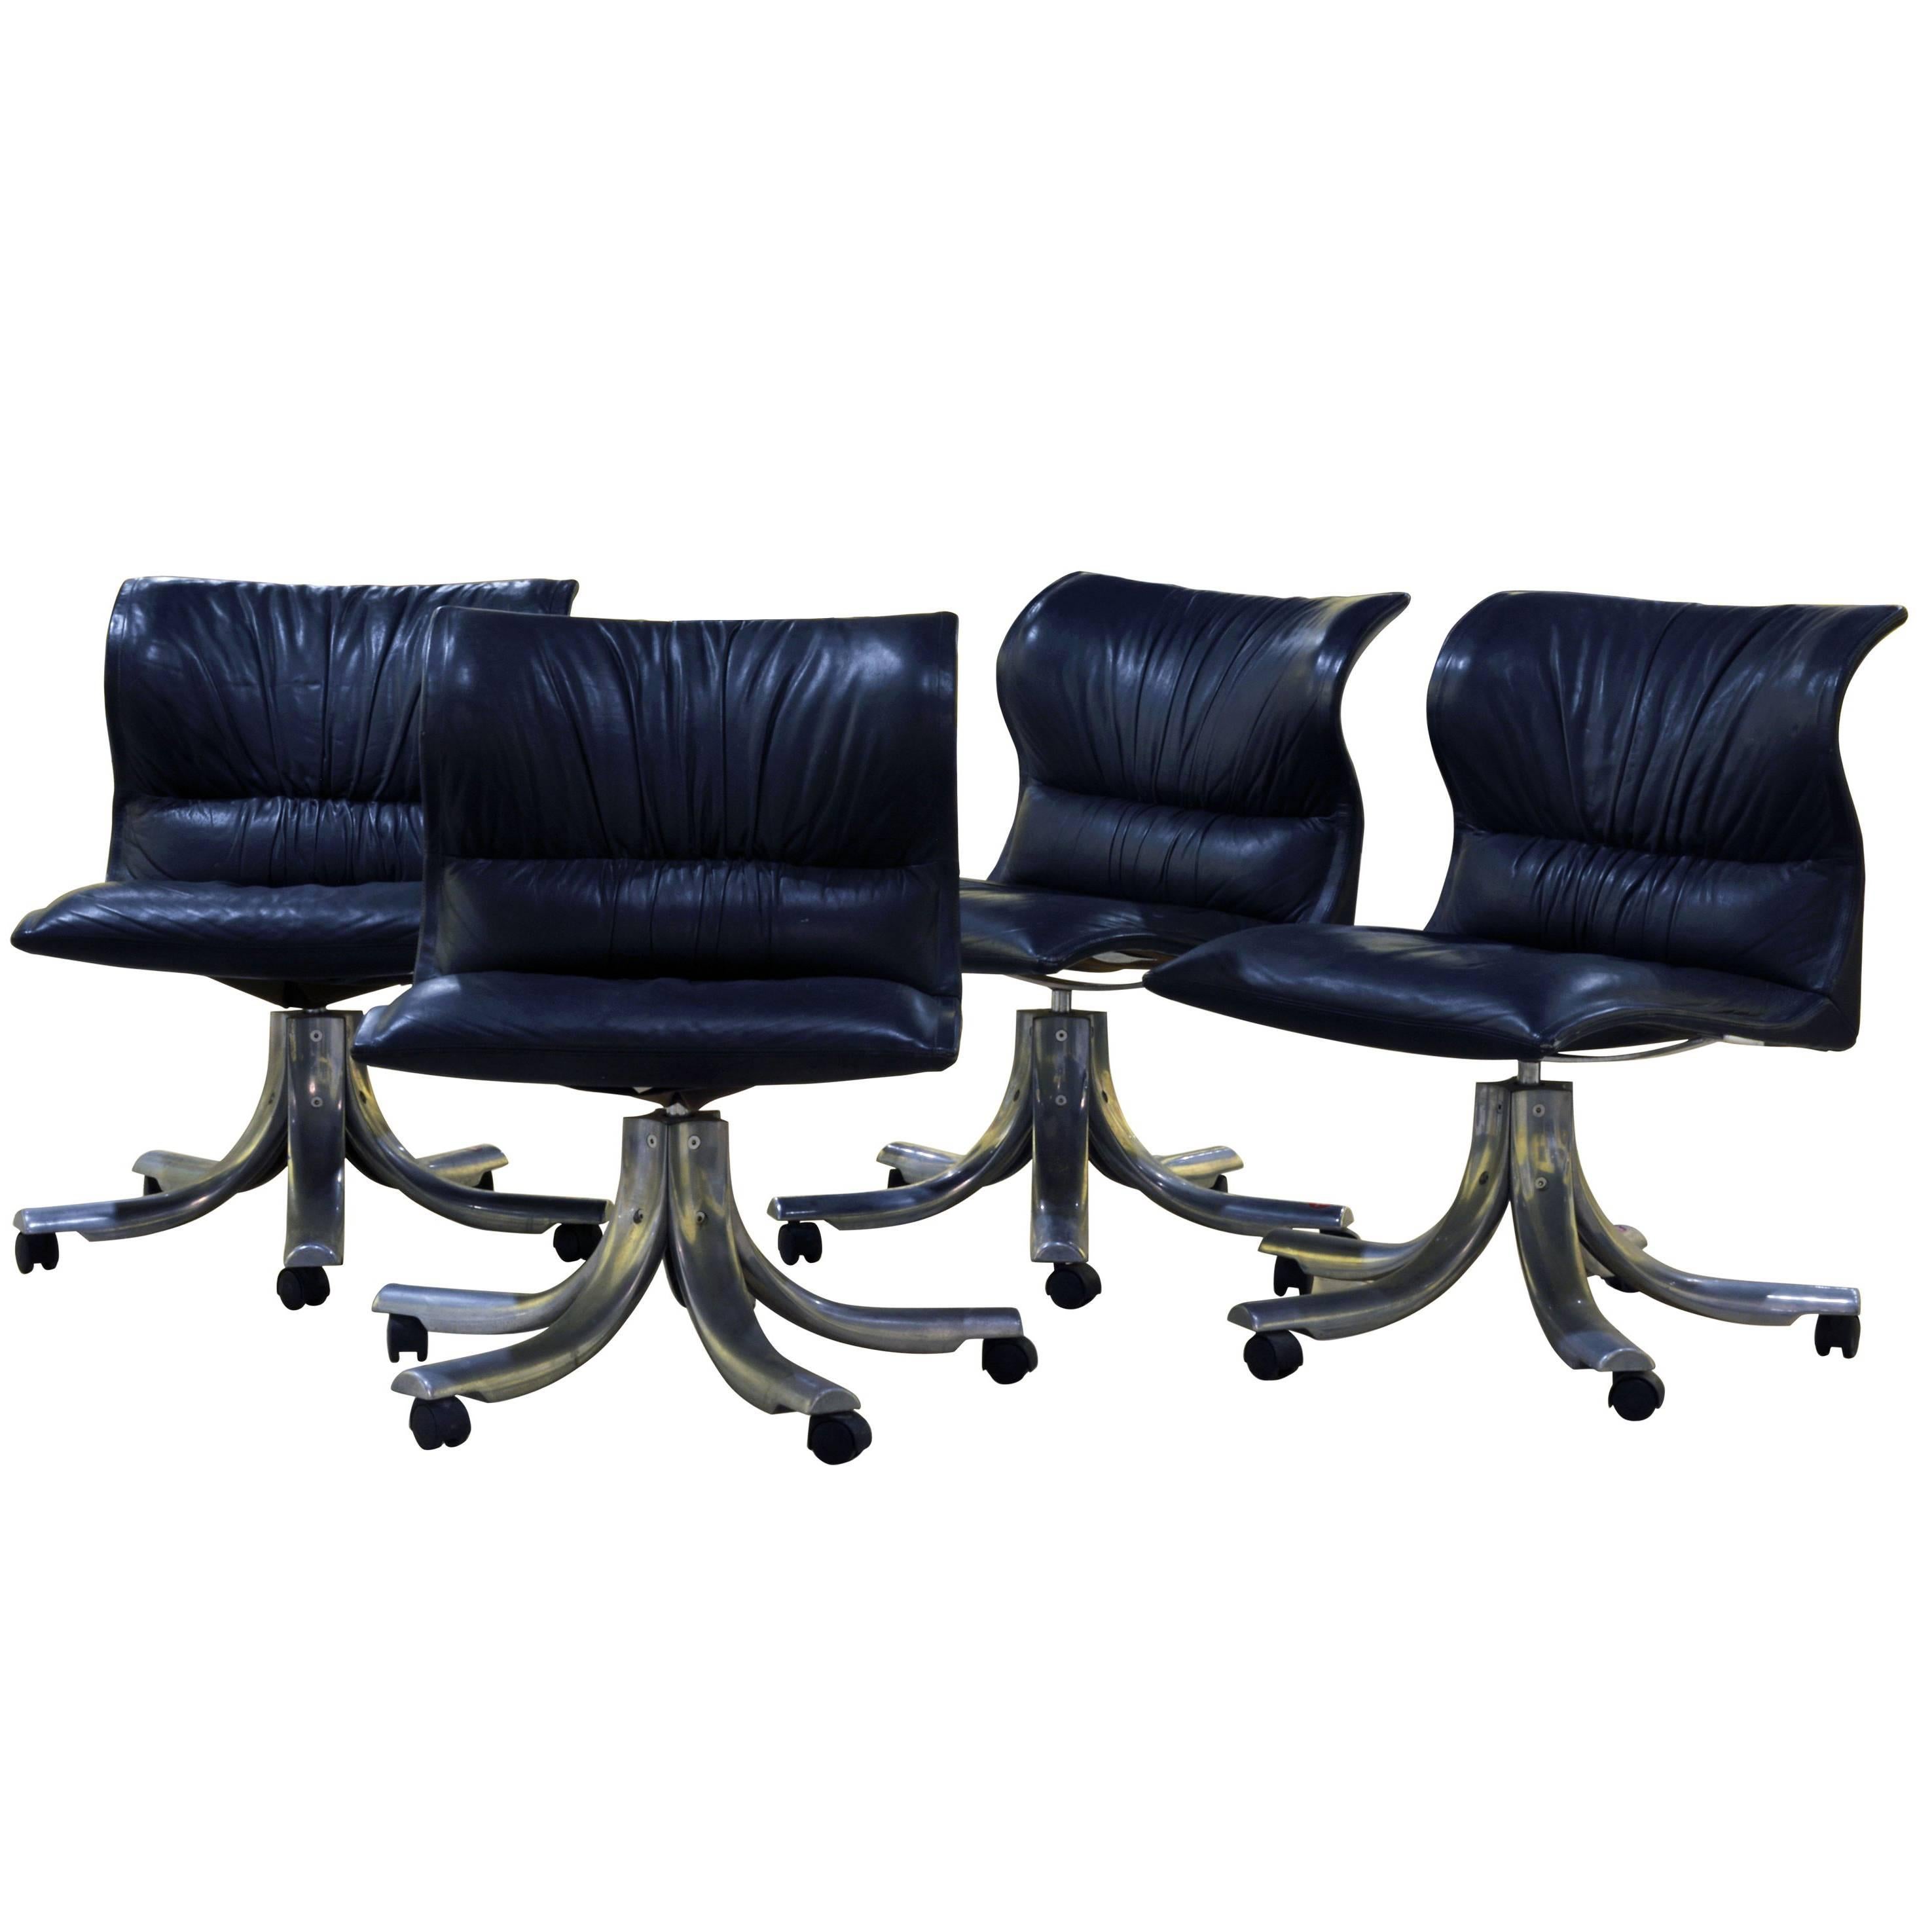 Group of Four Executive Leather Lounge Chairs by Giovanni Offredi for Saporiti